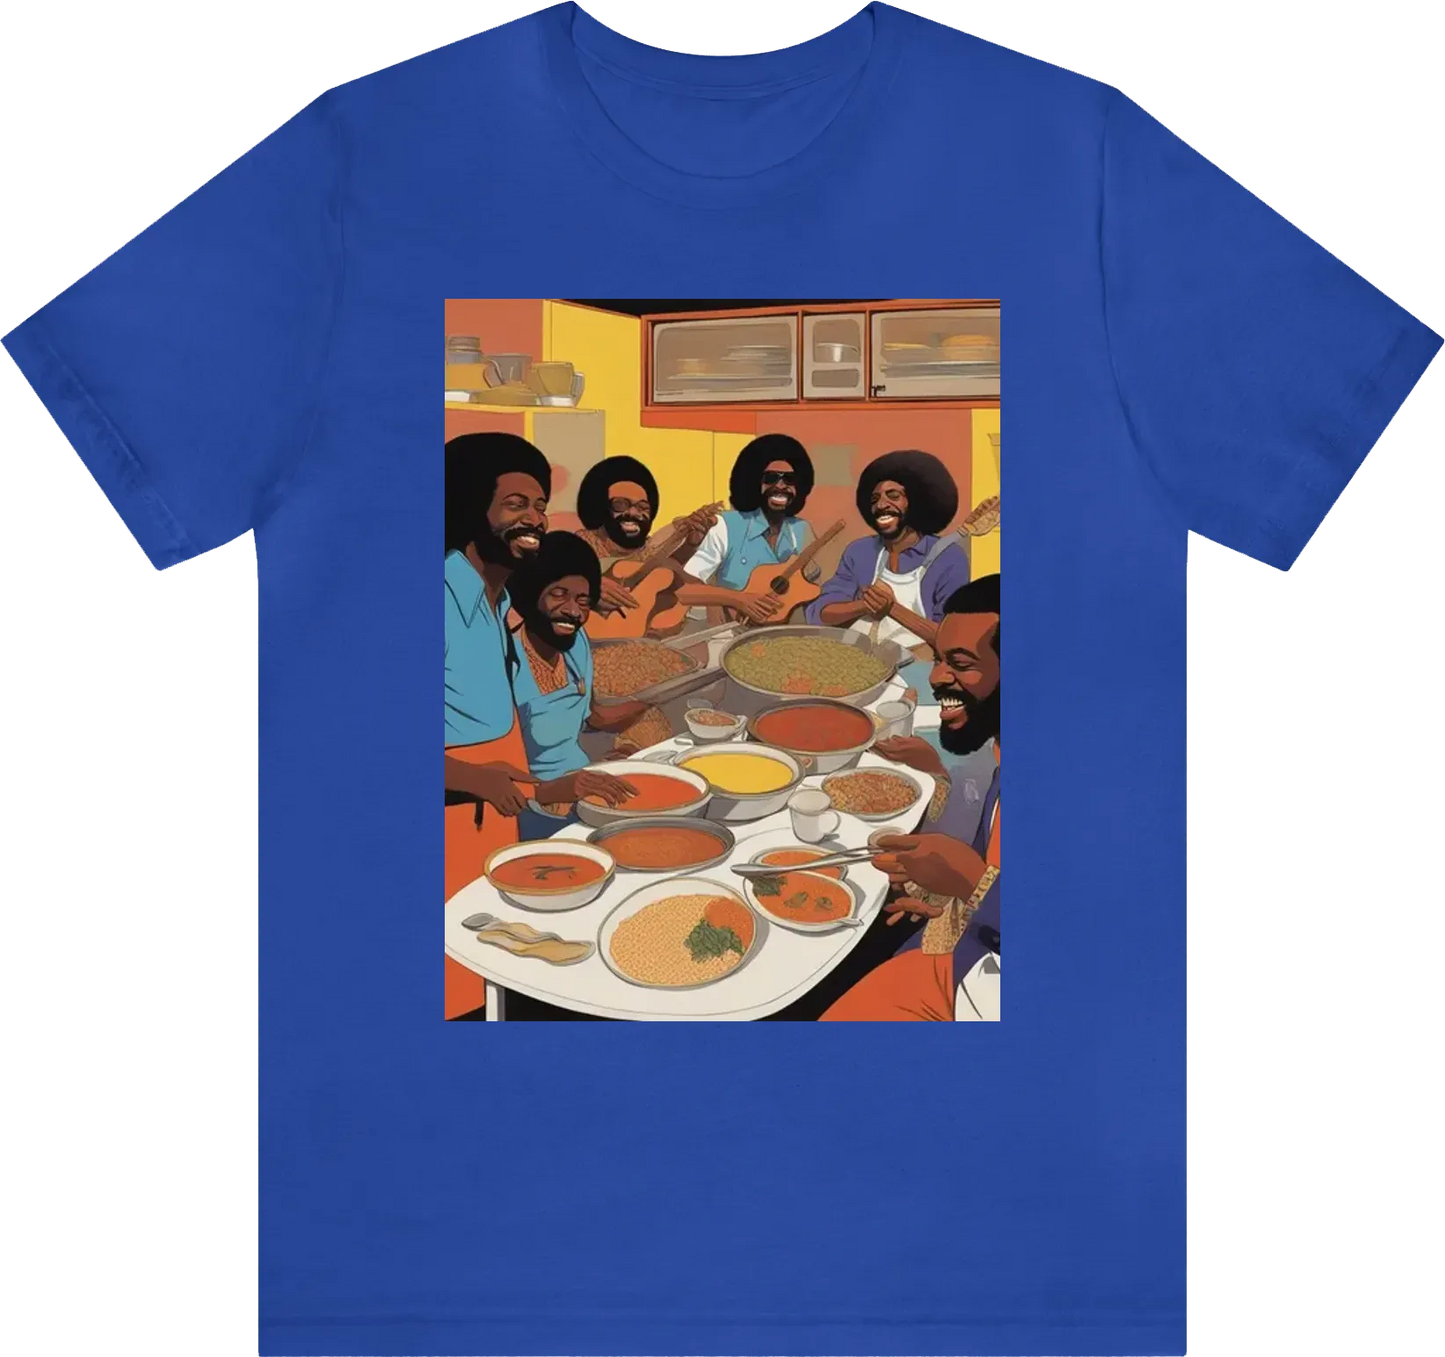 A 1970s album cover for a funk band. art work is themed around a soup kitchen. no text